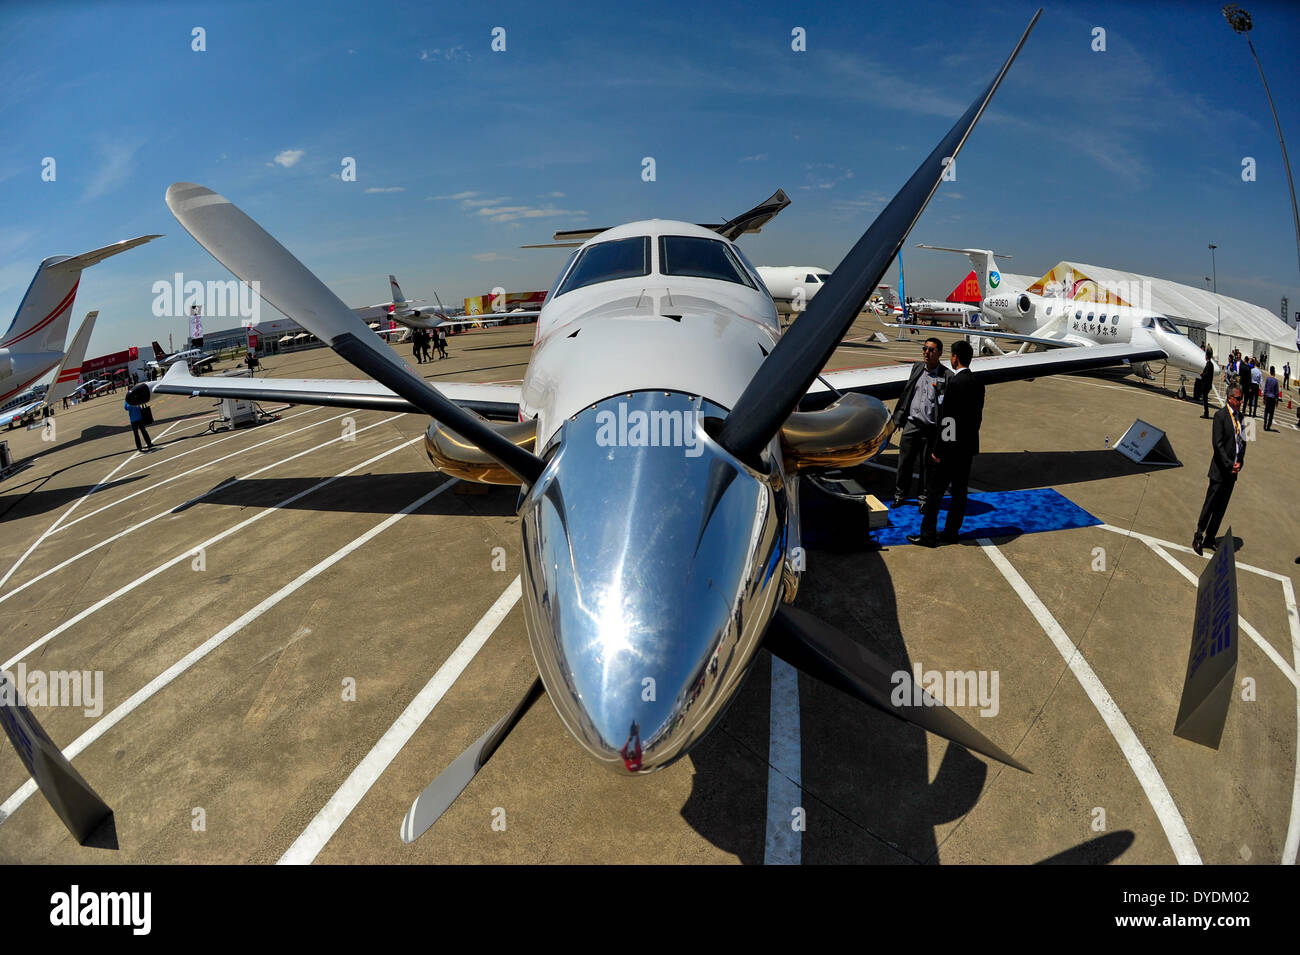 (140415) -- SHANGHAI, April 15, 2014 (Xinhua) -- A visitor looks at a Pilatus PC-12 business airplane at the 2014 Asian Business Aviation Conference & Exhibition (ABACE2014) in east China's Shanghai, April 15, 2014. ABACE2014, Asia's largest business aviation product and services event, kicked off Tuesday in Shanghai. Thirty-eight business aircrafts made by 20 manufacturers, including Boeing, Airbus and Bombardier, will be displayed during the three-day event. Their prices range from 3 million yuan (482,000 U.S. dollars) to 560 million yuan (89.99 million U.S. dollars). (Xinhua/Yang Guang) (lm Stock Photo